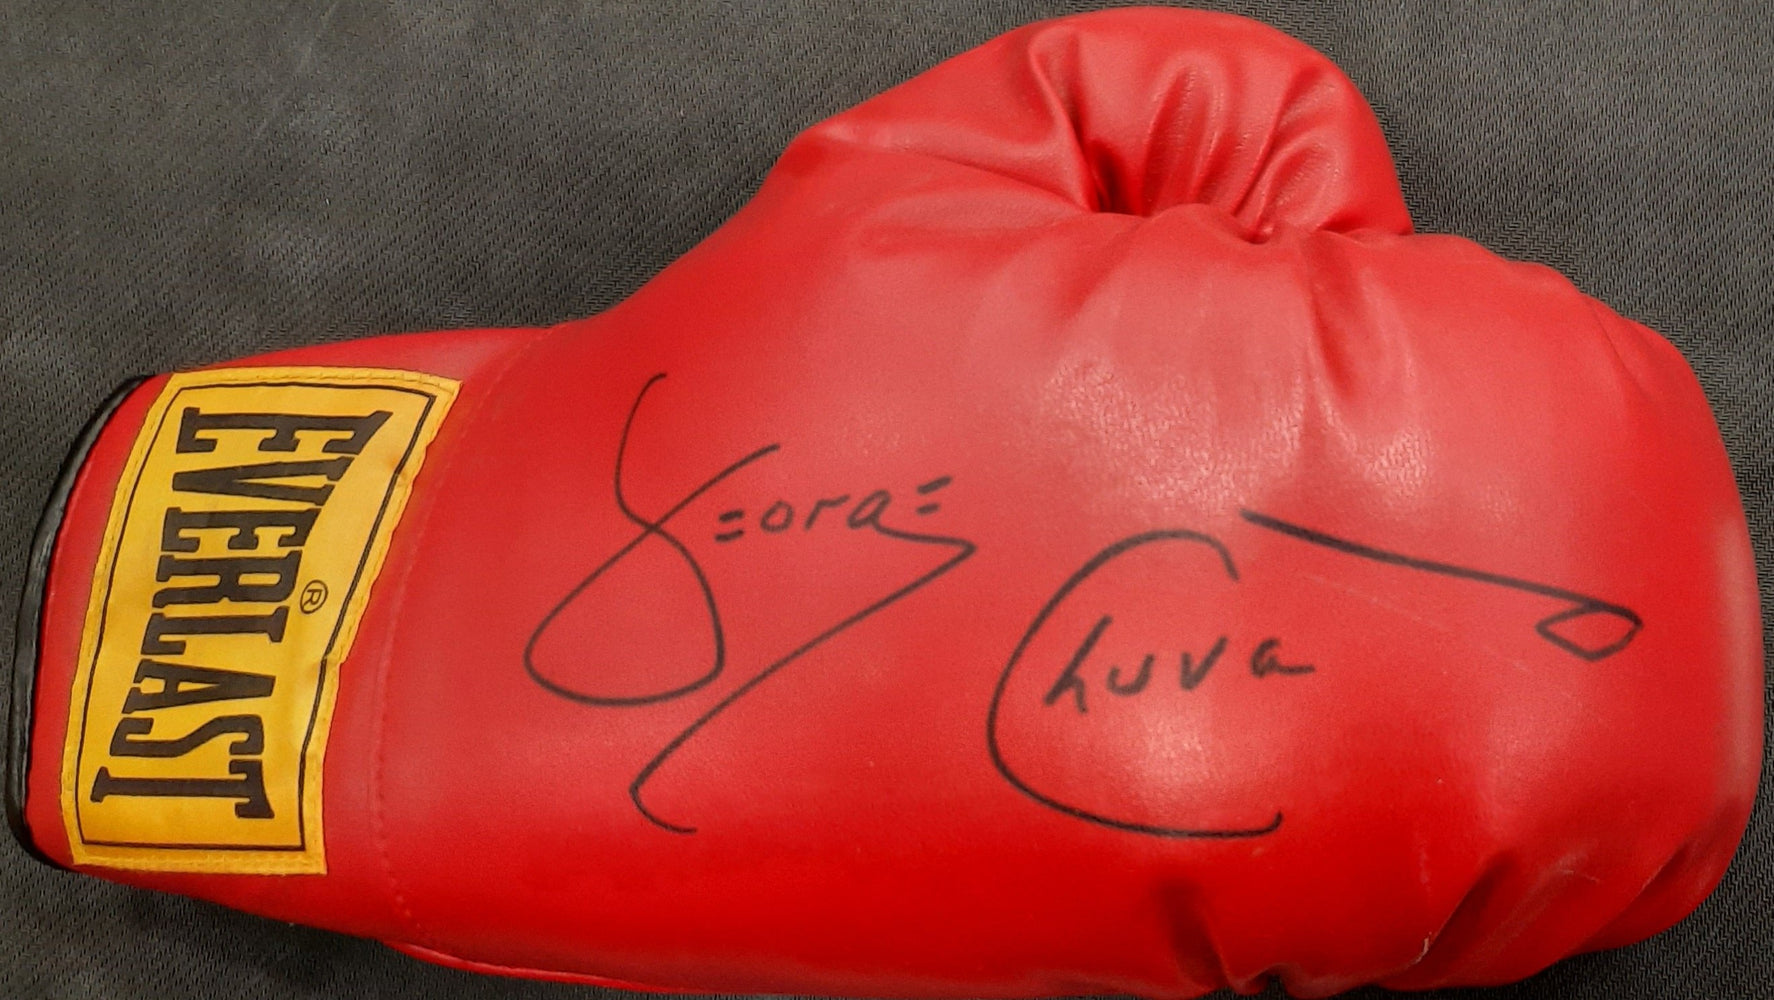 George Chuvalo Autographed Boxing Glove - Pastime Sports & Games